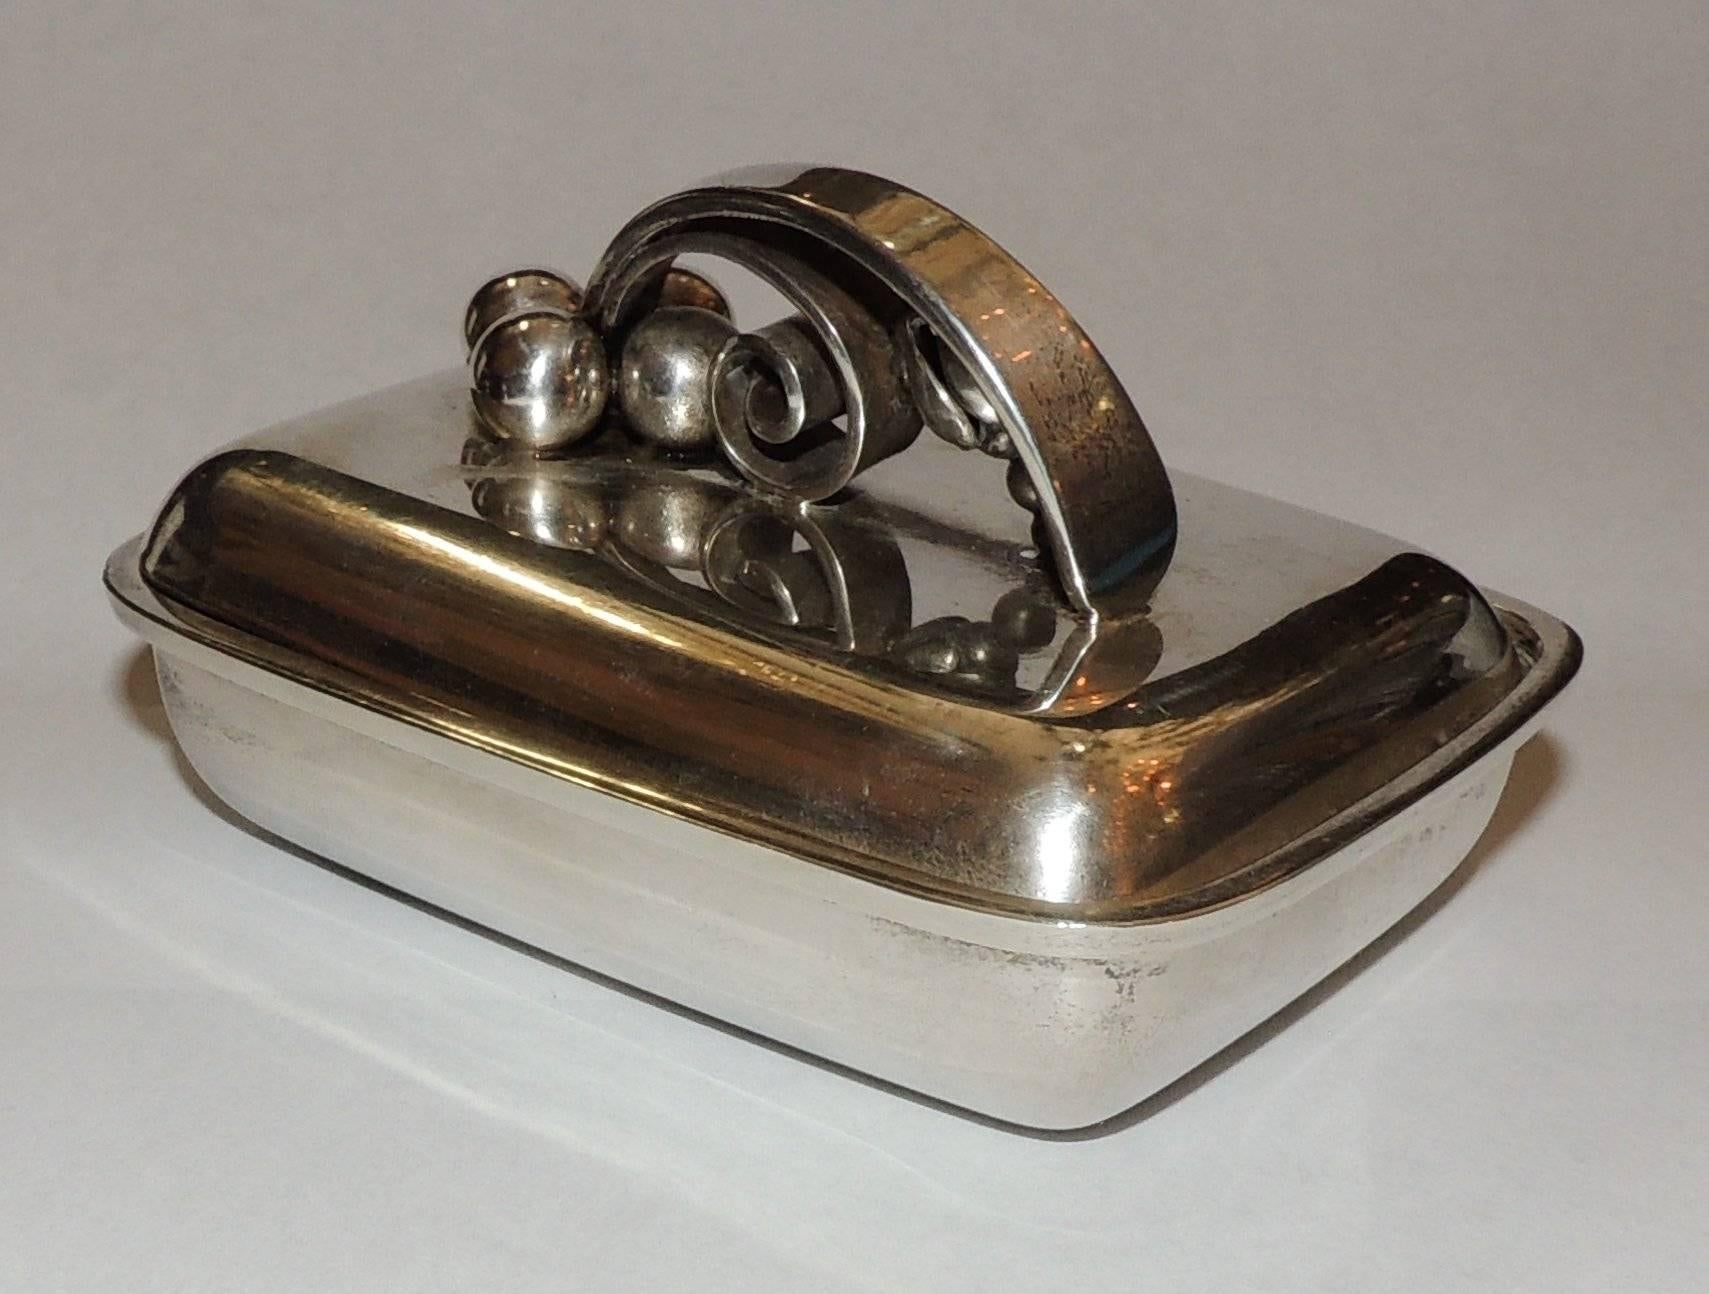 Wonderful Alfonse La Paglia Georg Jensen Sterling Silver Modernist Box Handle In Good Condition For Sale In Roslyn, NY